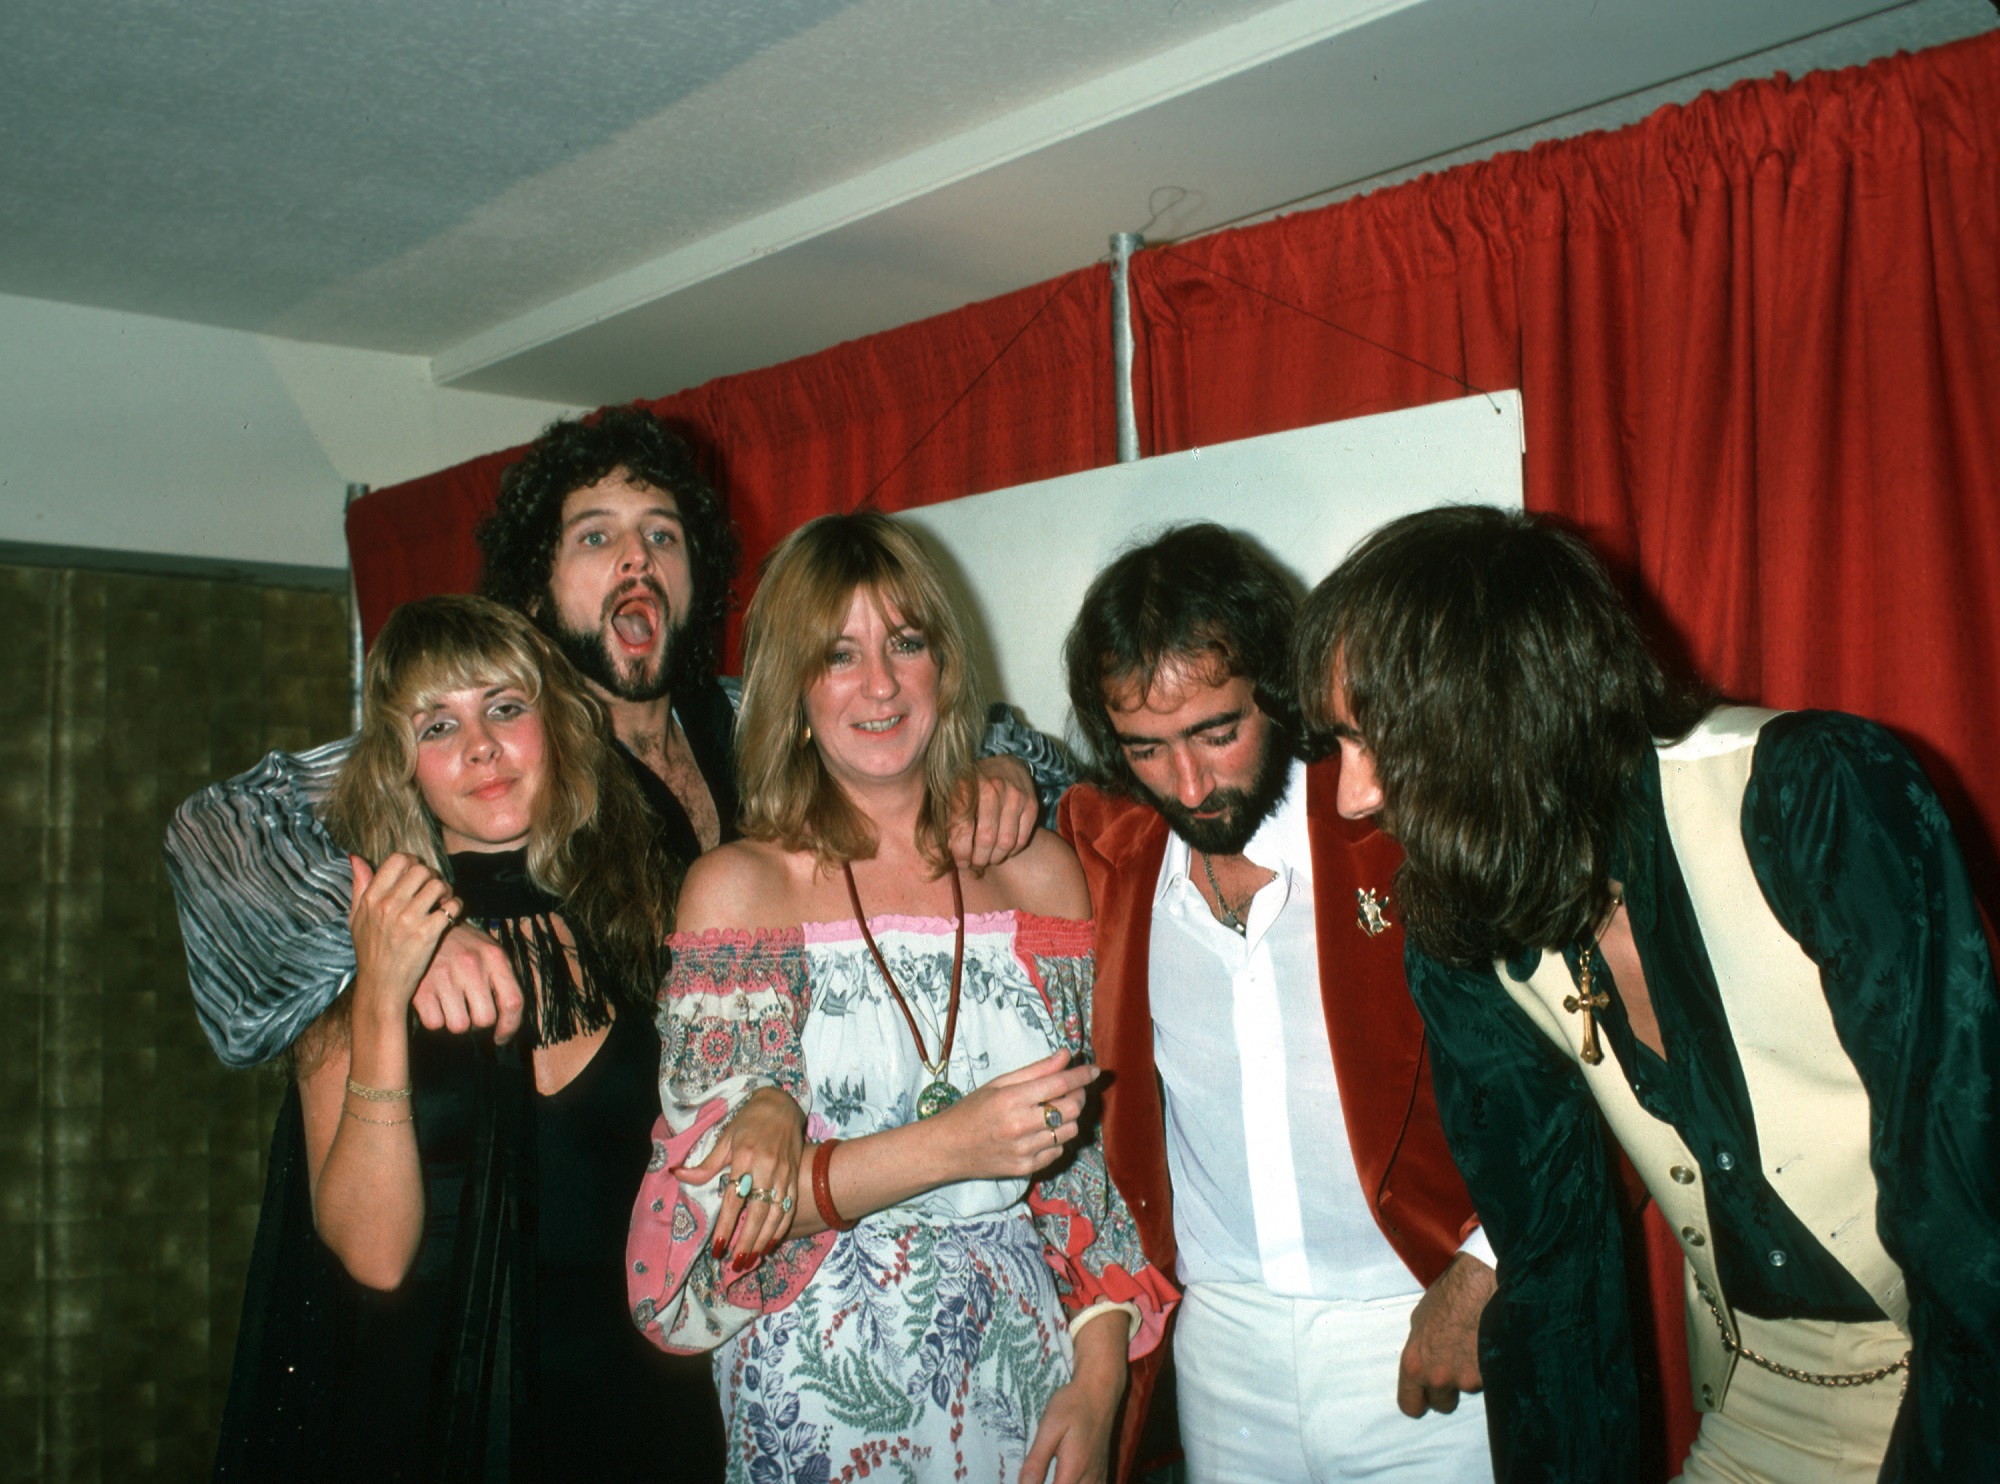 Stevie Nicks, Lindsey Buckingham, Christine McVie, John McVie and Mick Fleetwood of Fleetwood Mac huddle together in front of a red curtain backstage